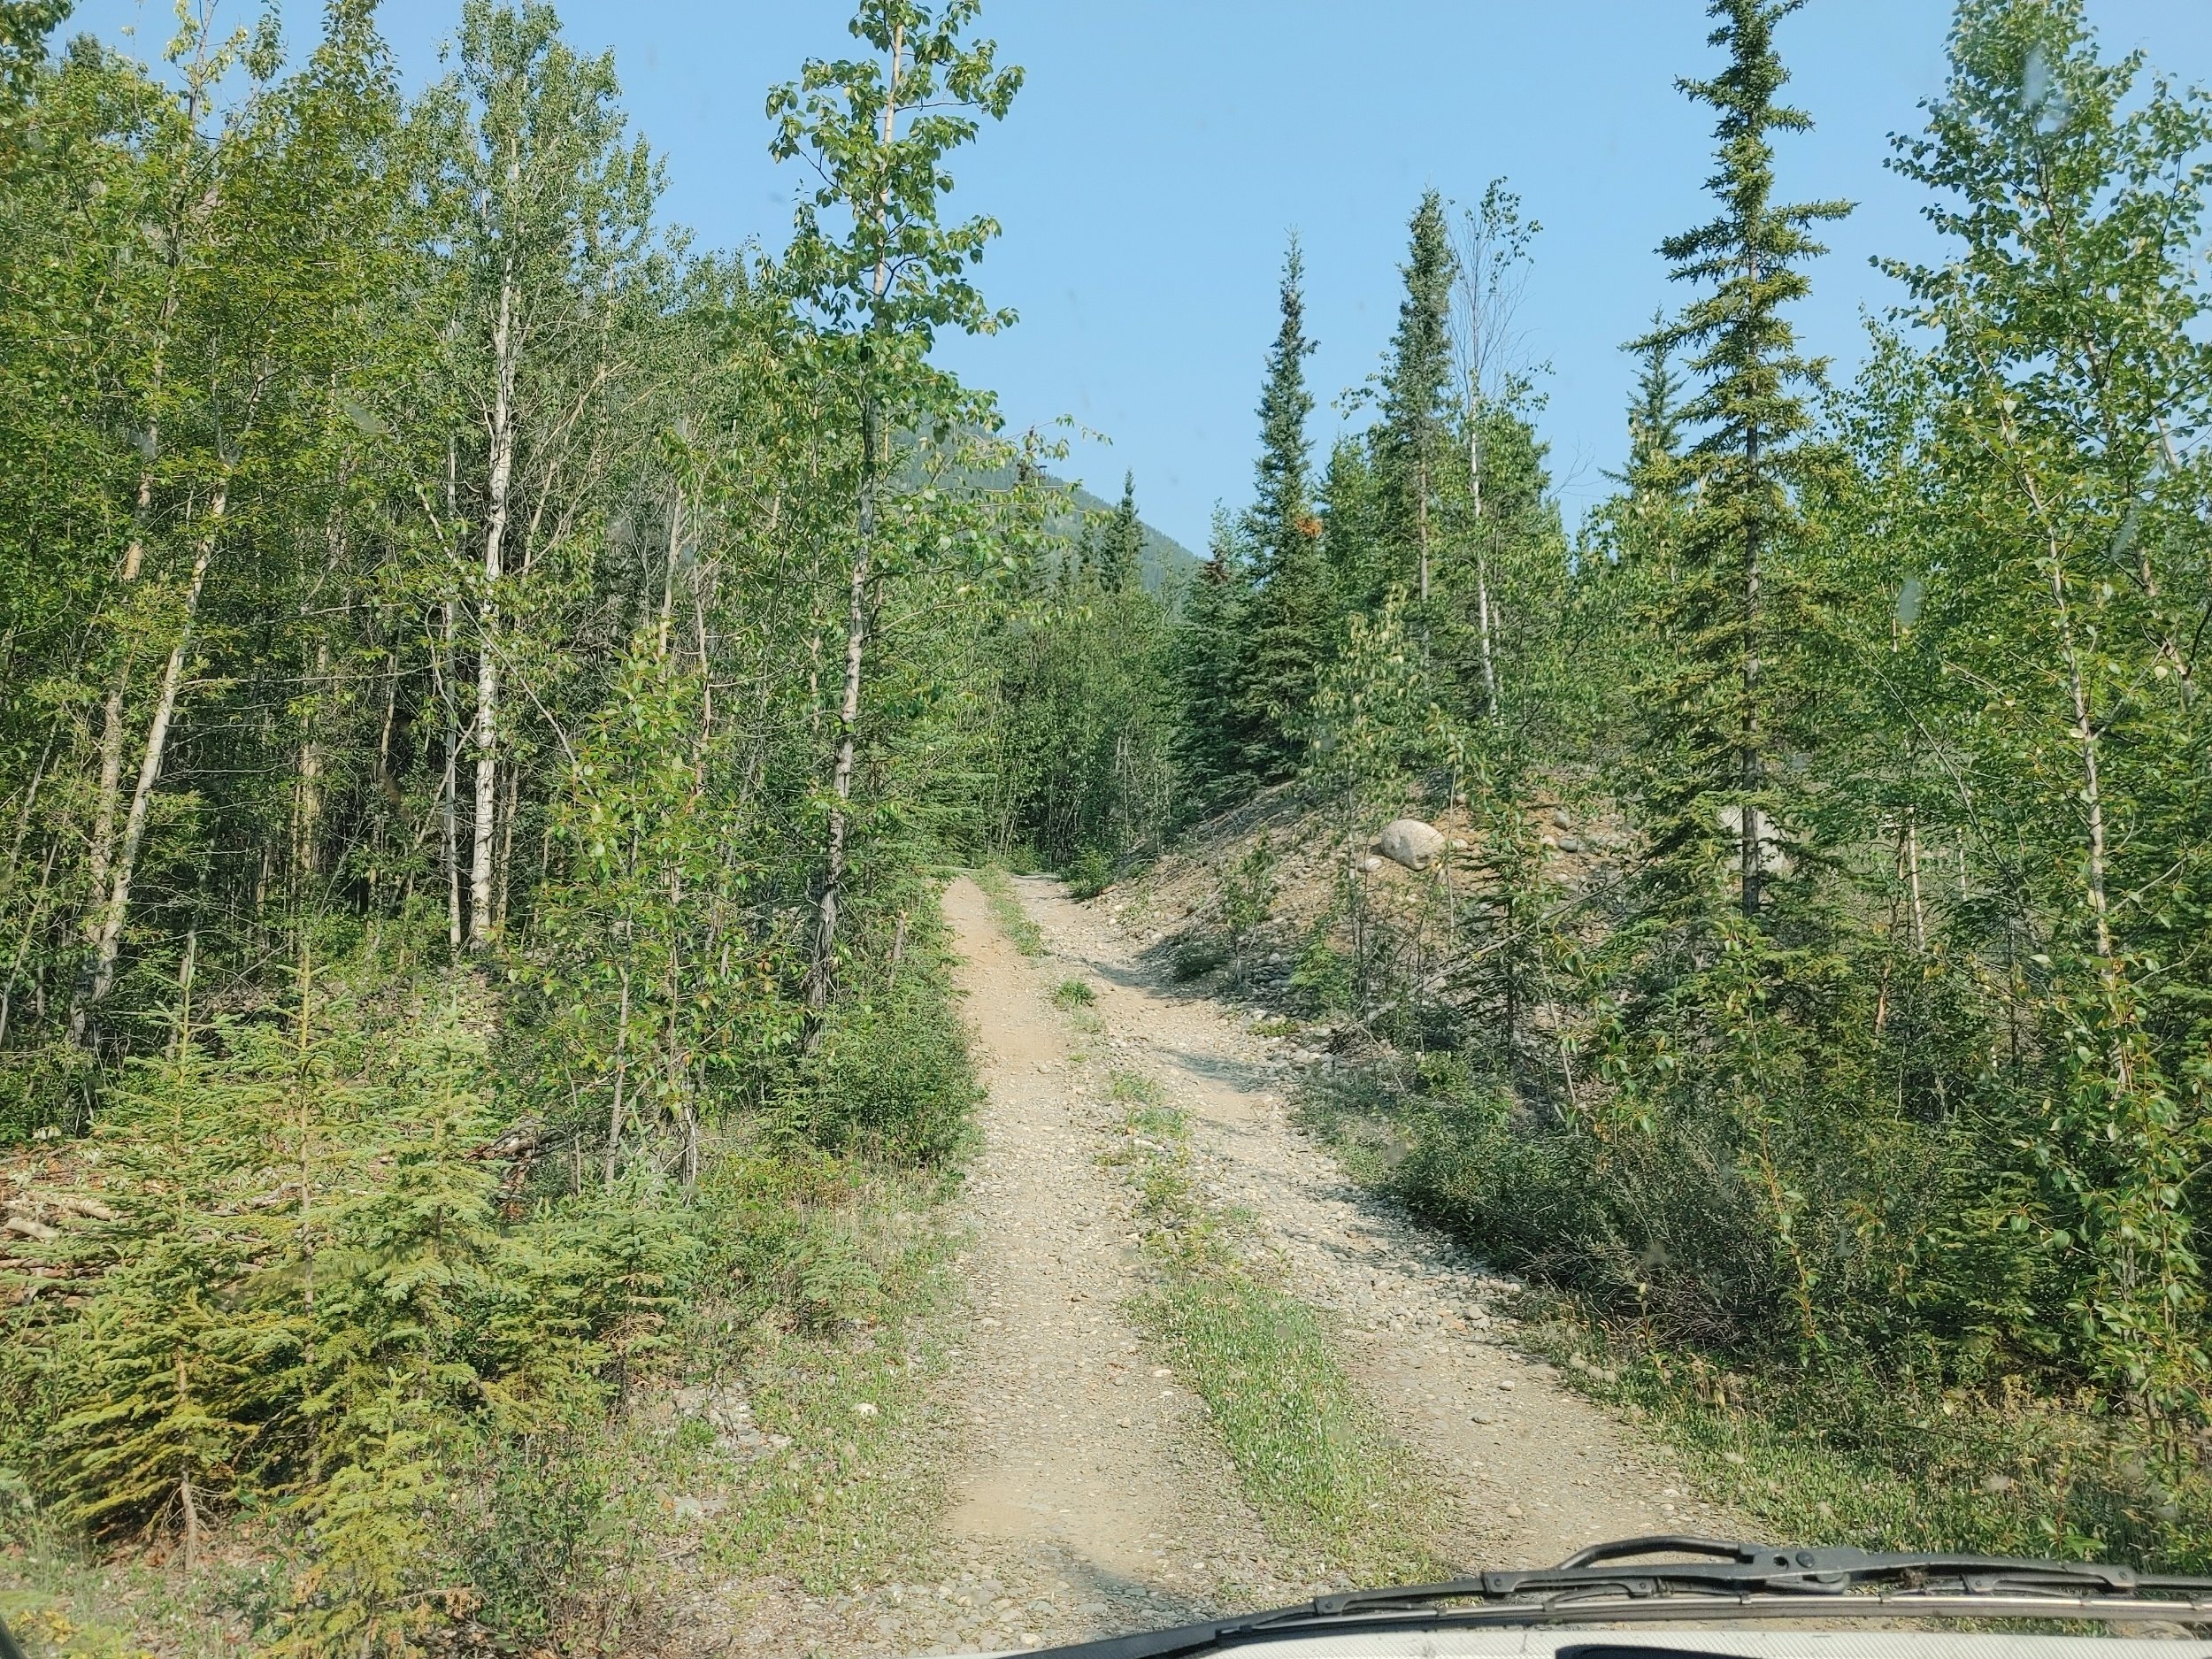  This is a steep little hill, I knew was going to be a bit troublesome getting back up and sure enough my first attempt was unsuccessful. I got out and moved some rocks around for better traction and gunned her up at 30MPH with good success.  